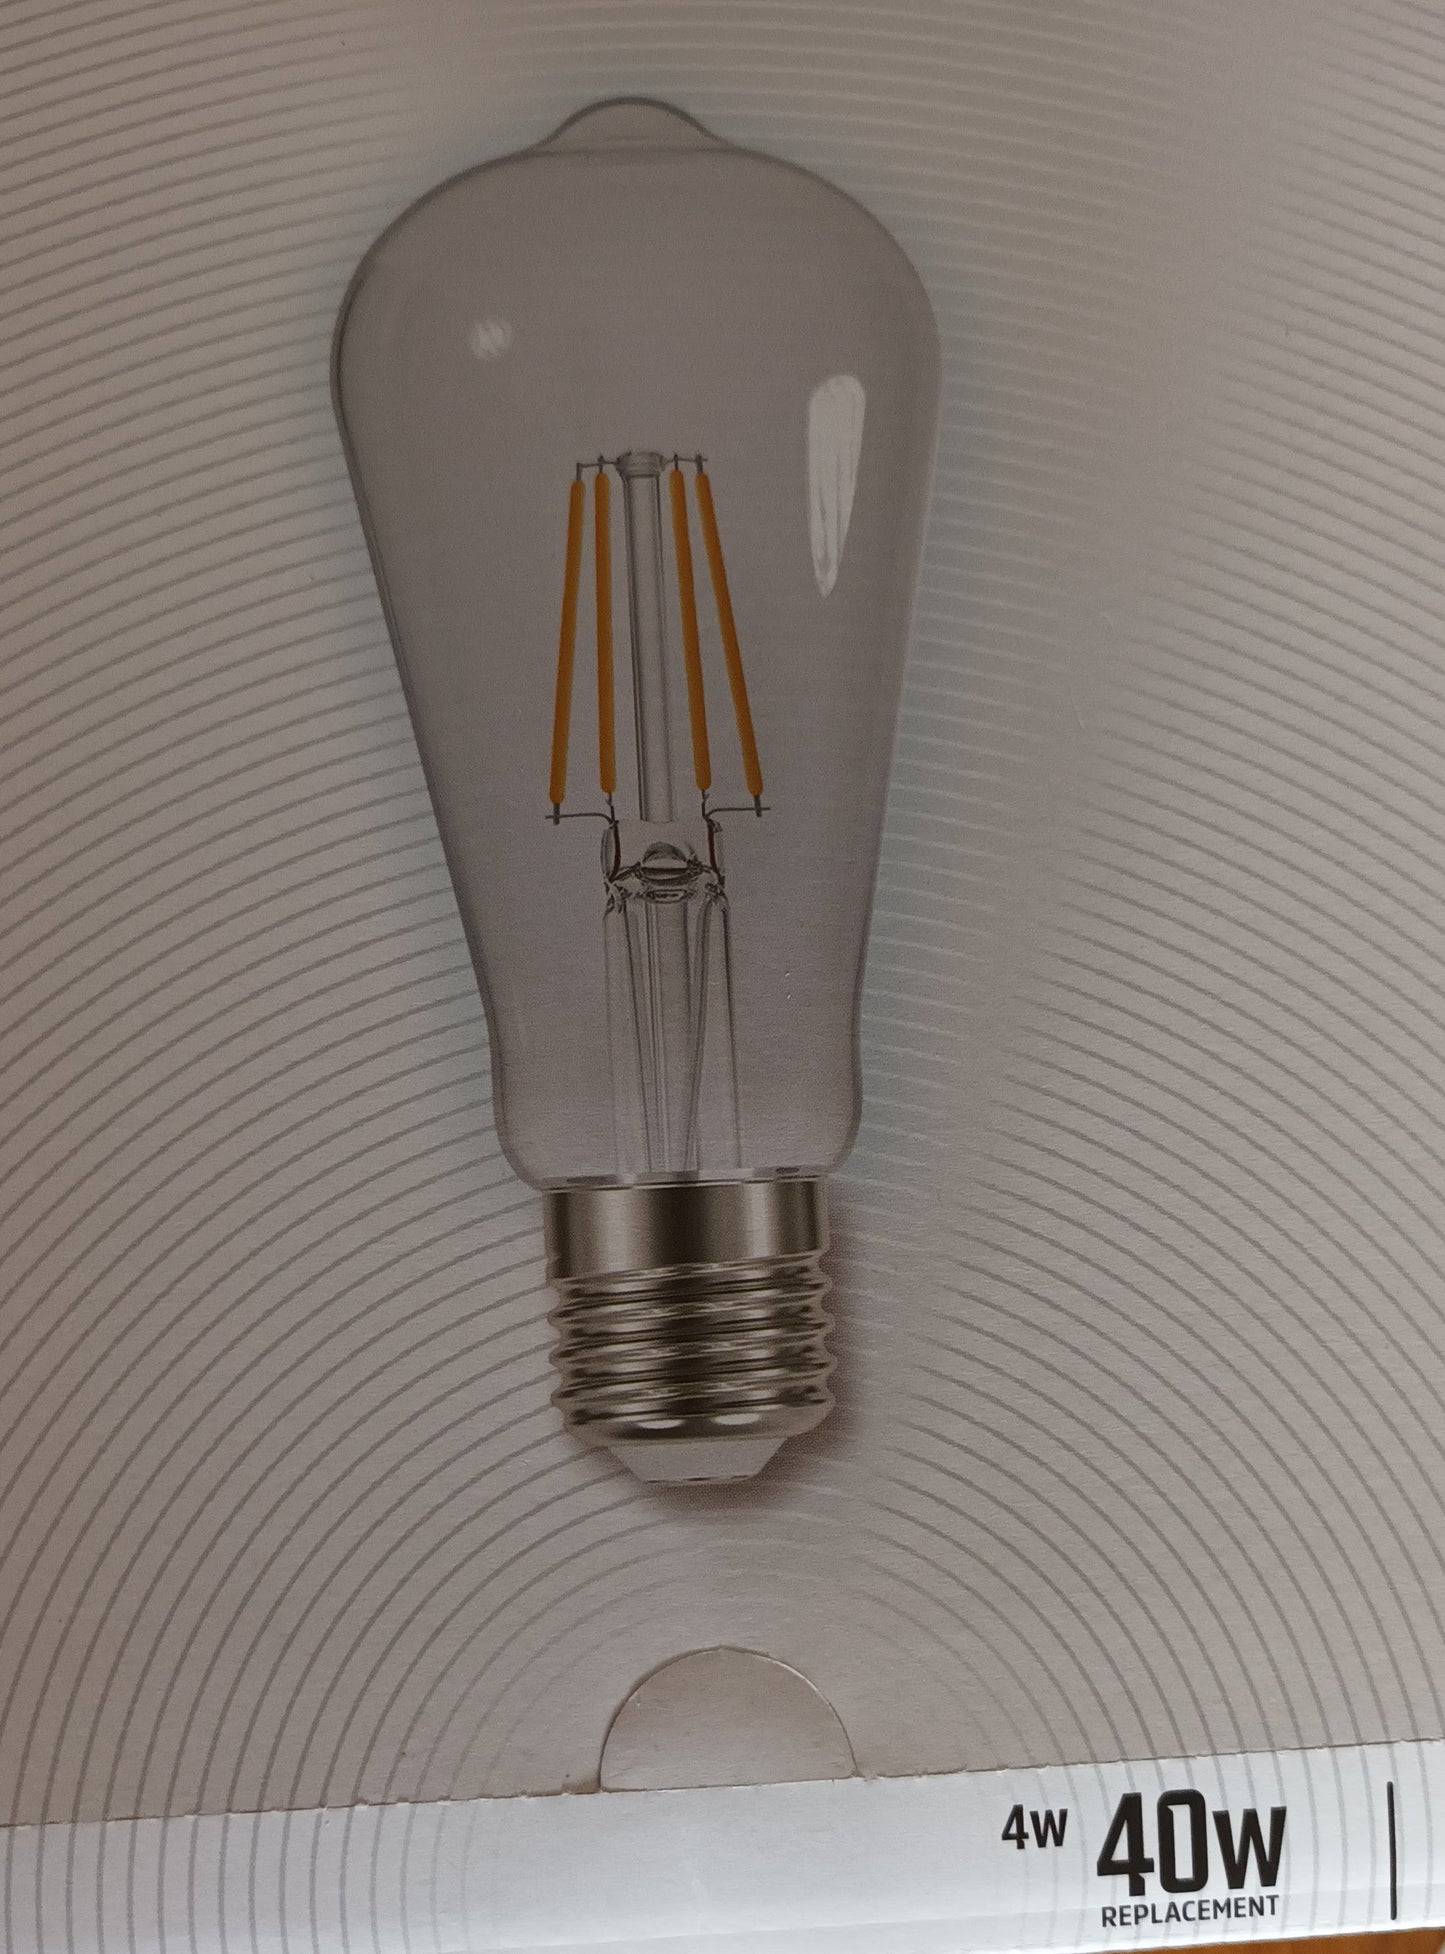 ST64 LED 4W Cool White / 4000K ES / E27 / Dimmable Filament